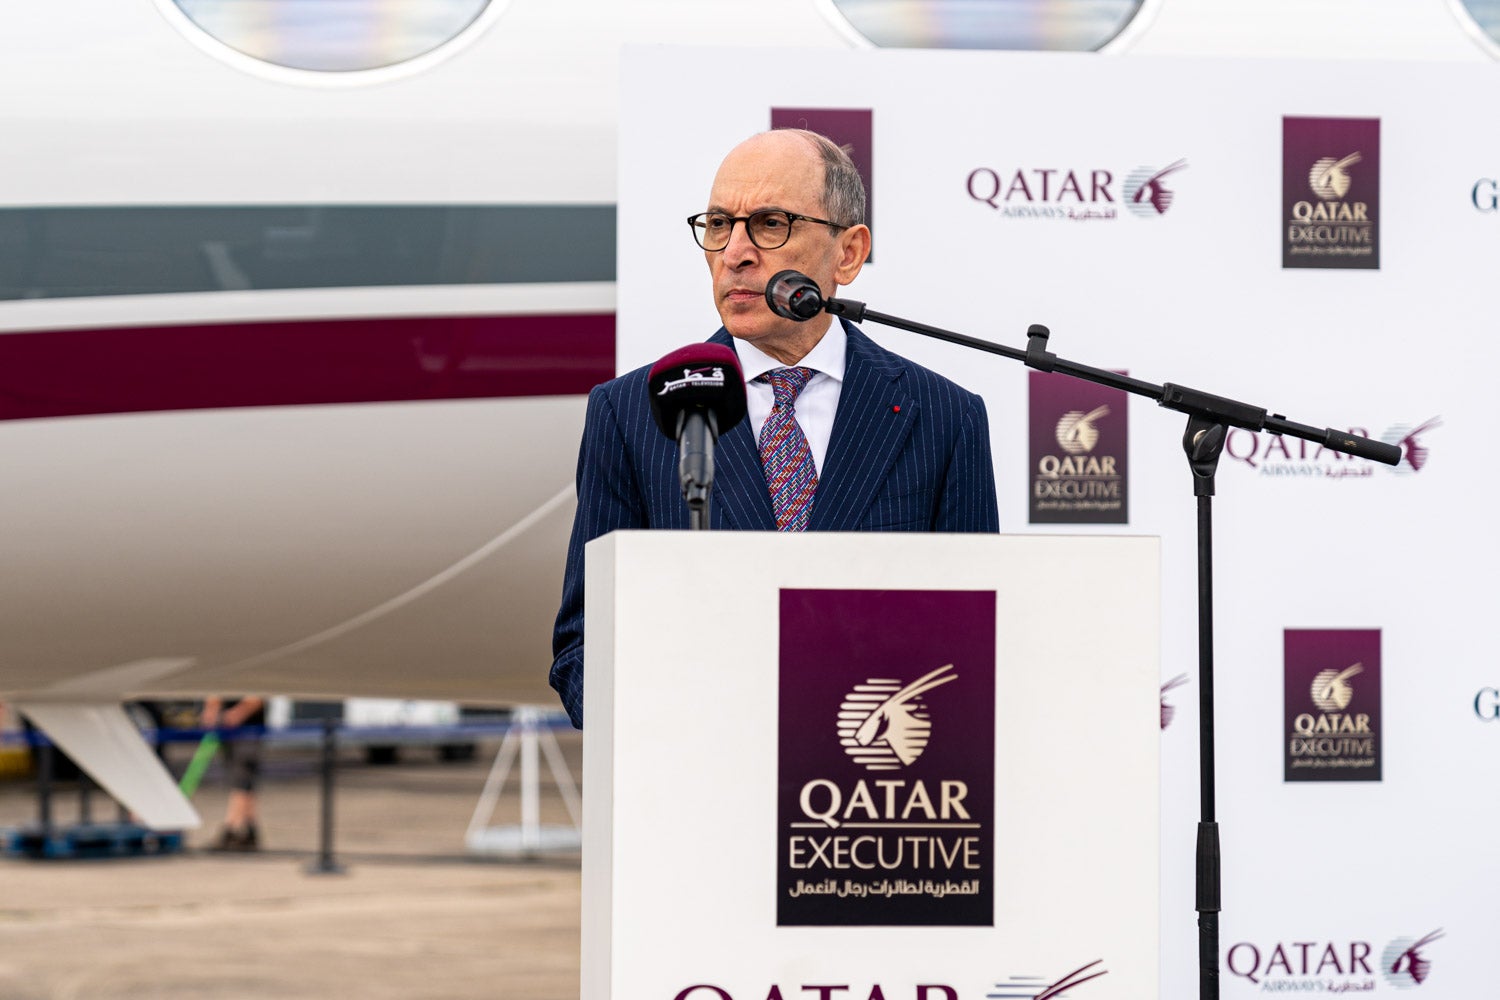 You are currently viewing Inside Qatar Airways’ Gulfstream G700 and Airbus A319 private jets